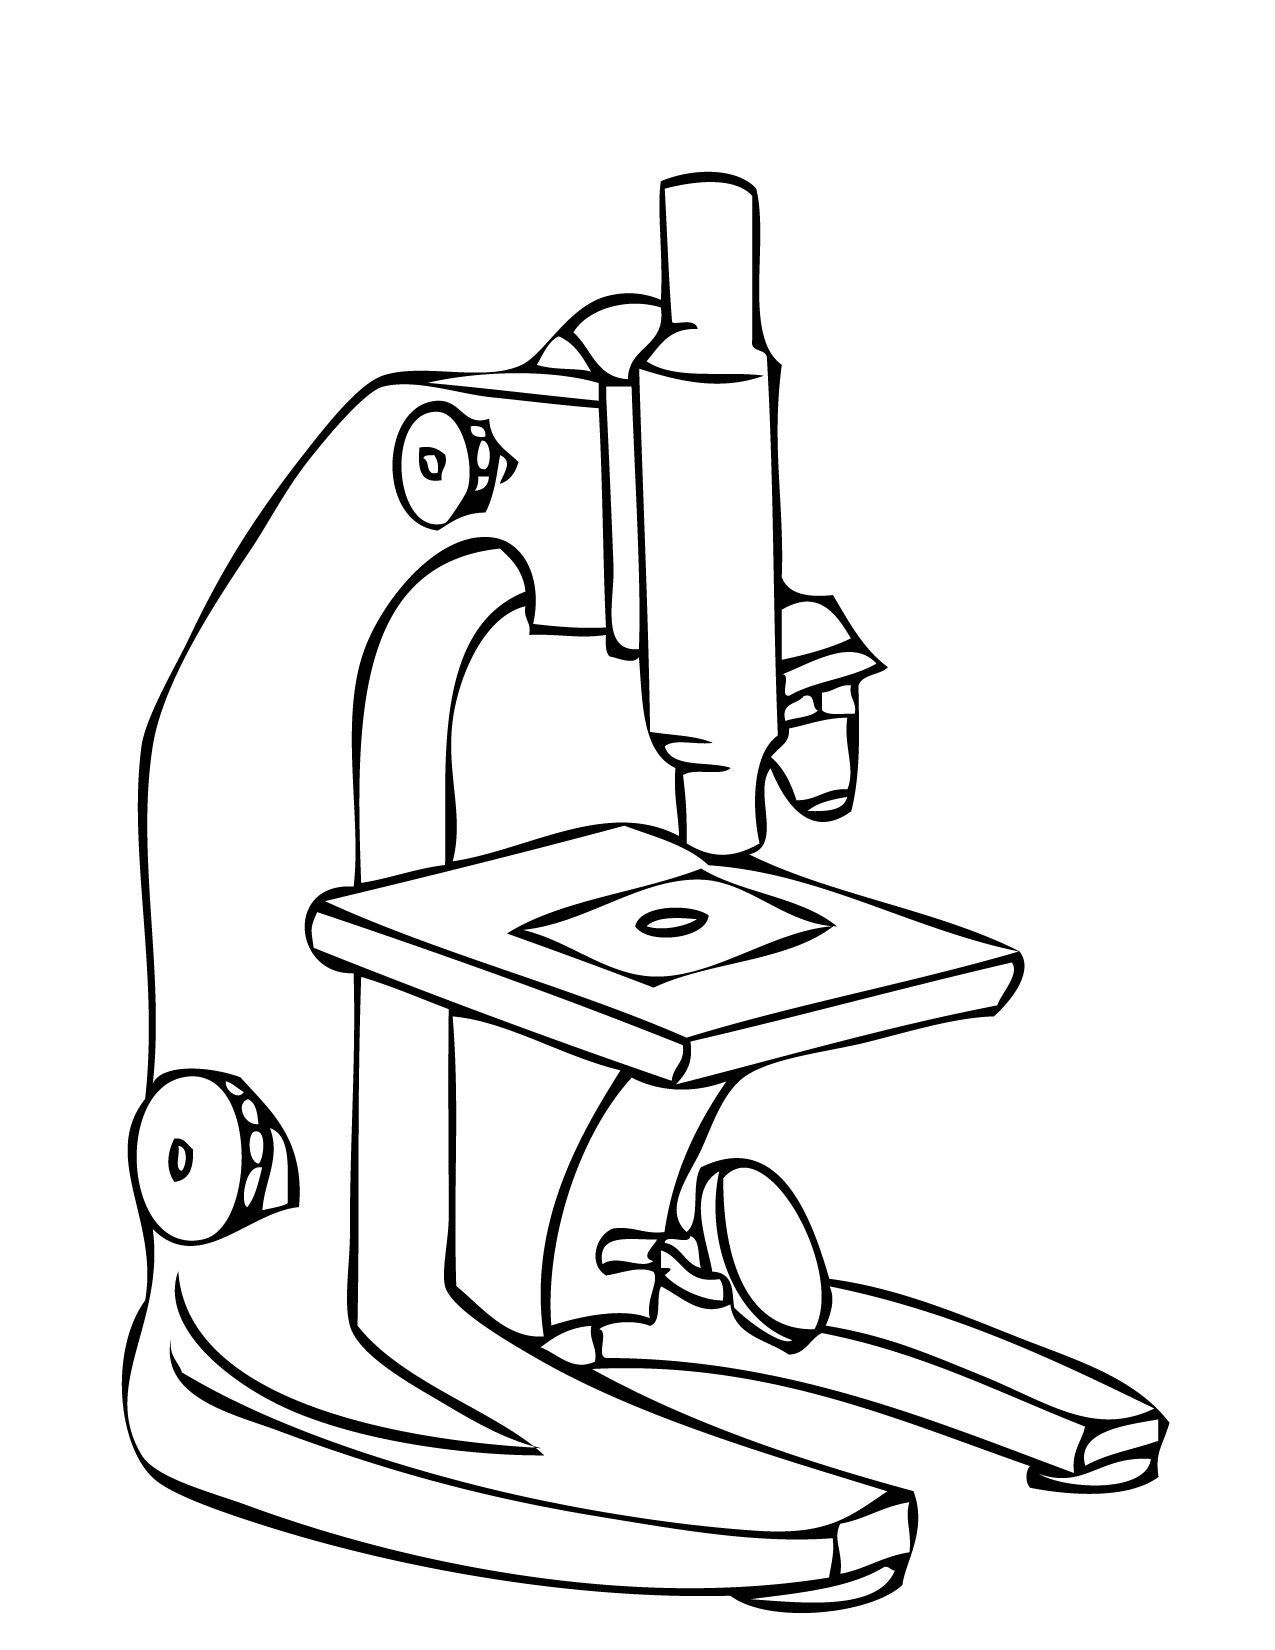 Simple Microscope Clipart Black And White | Clipart Panda - Free ...